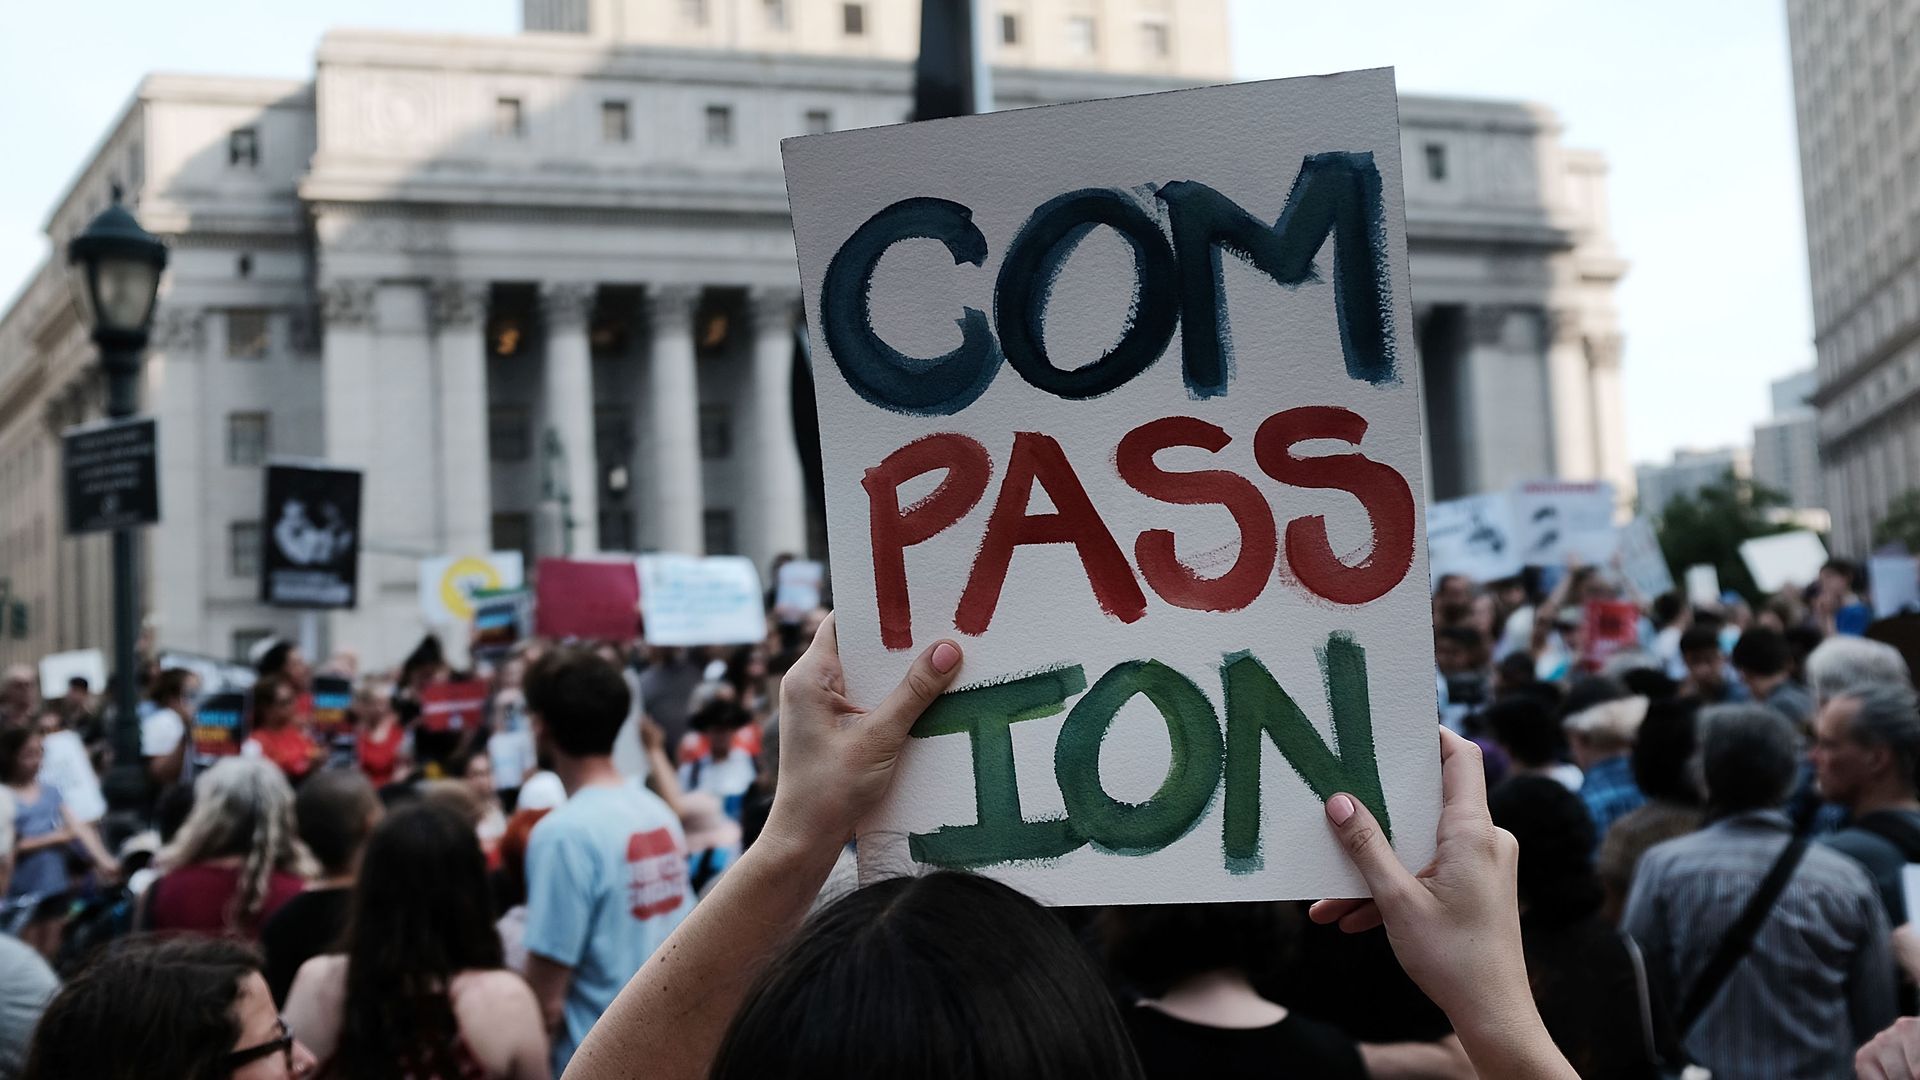 Protester holds sign reading "Compassion"